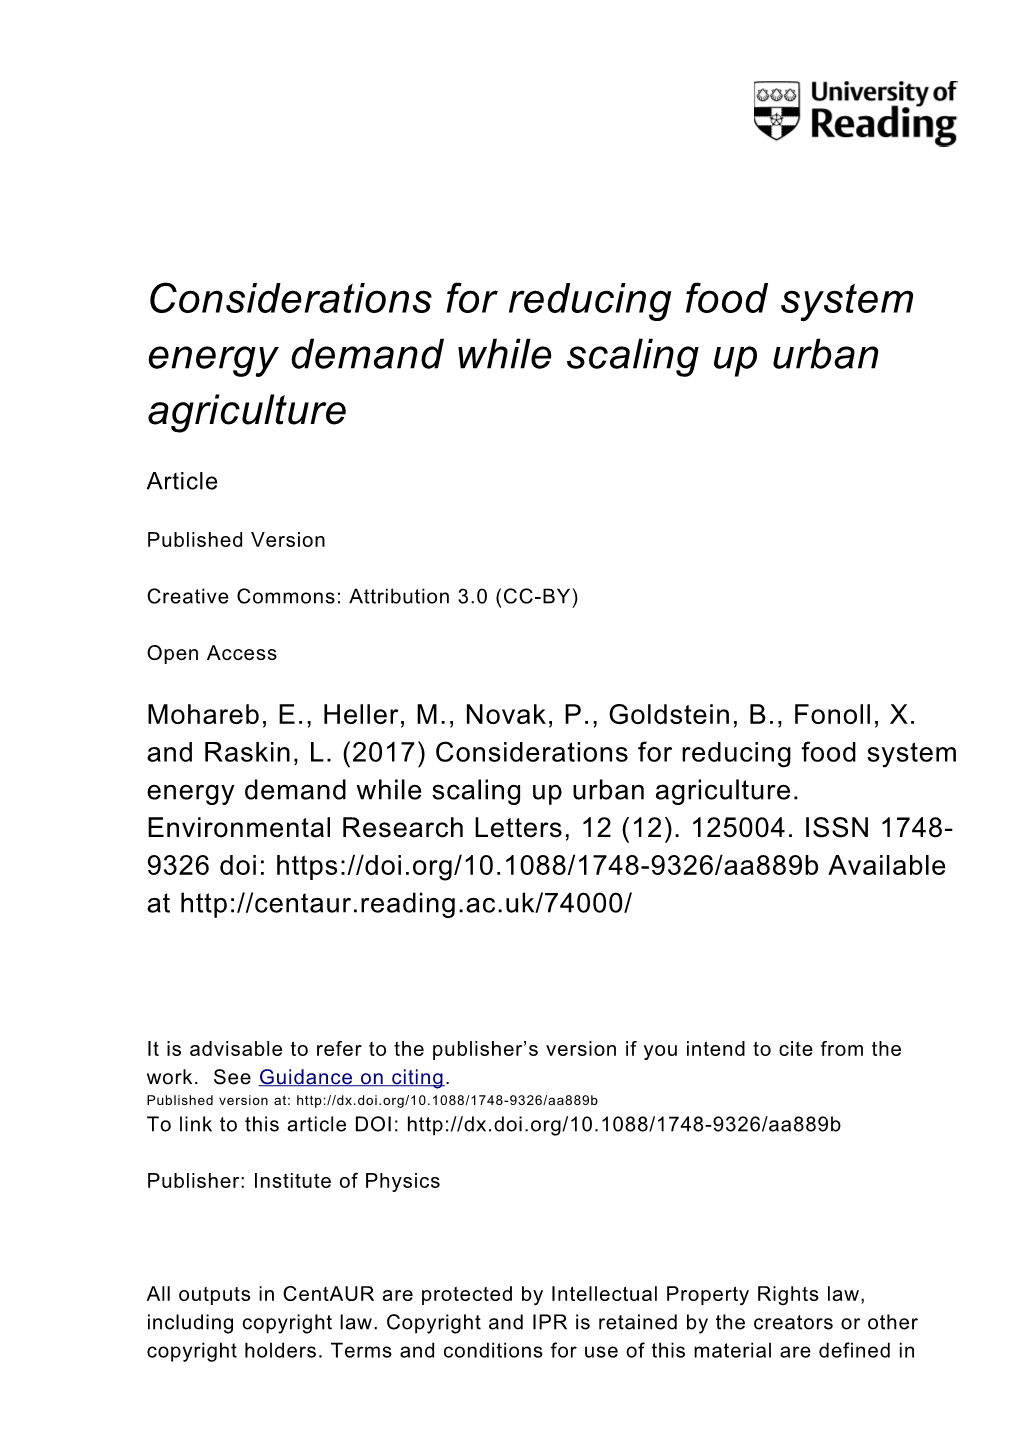 Considerations for Reducing Food System Energy Demand While Scaling up Urban Agriculture